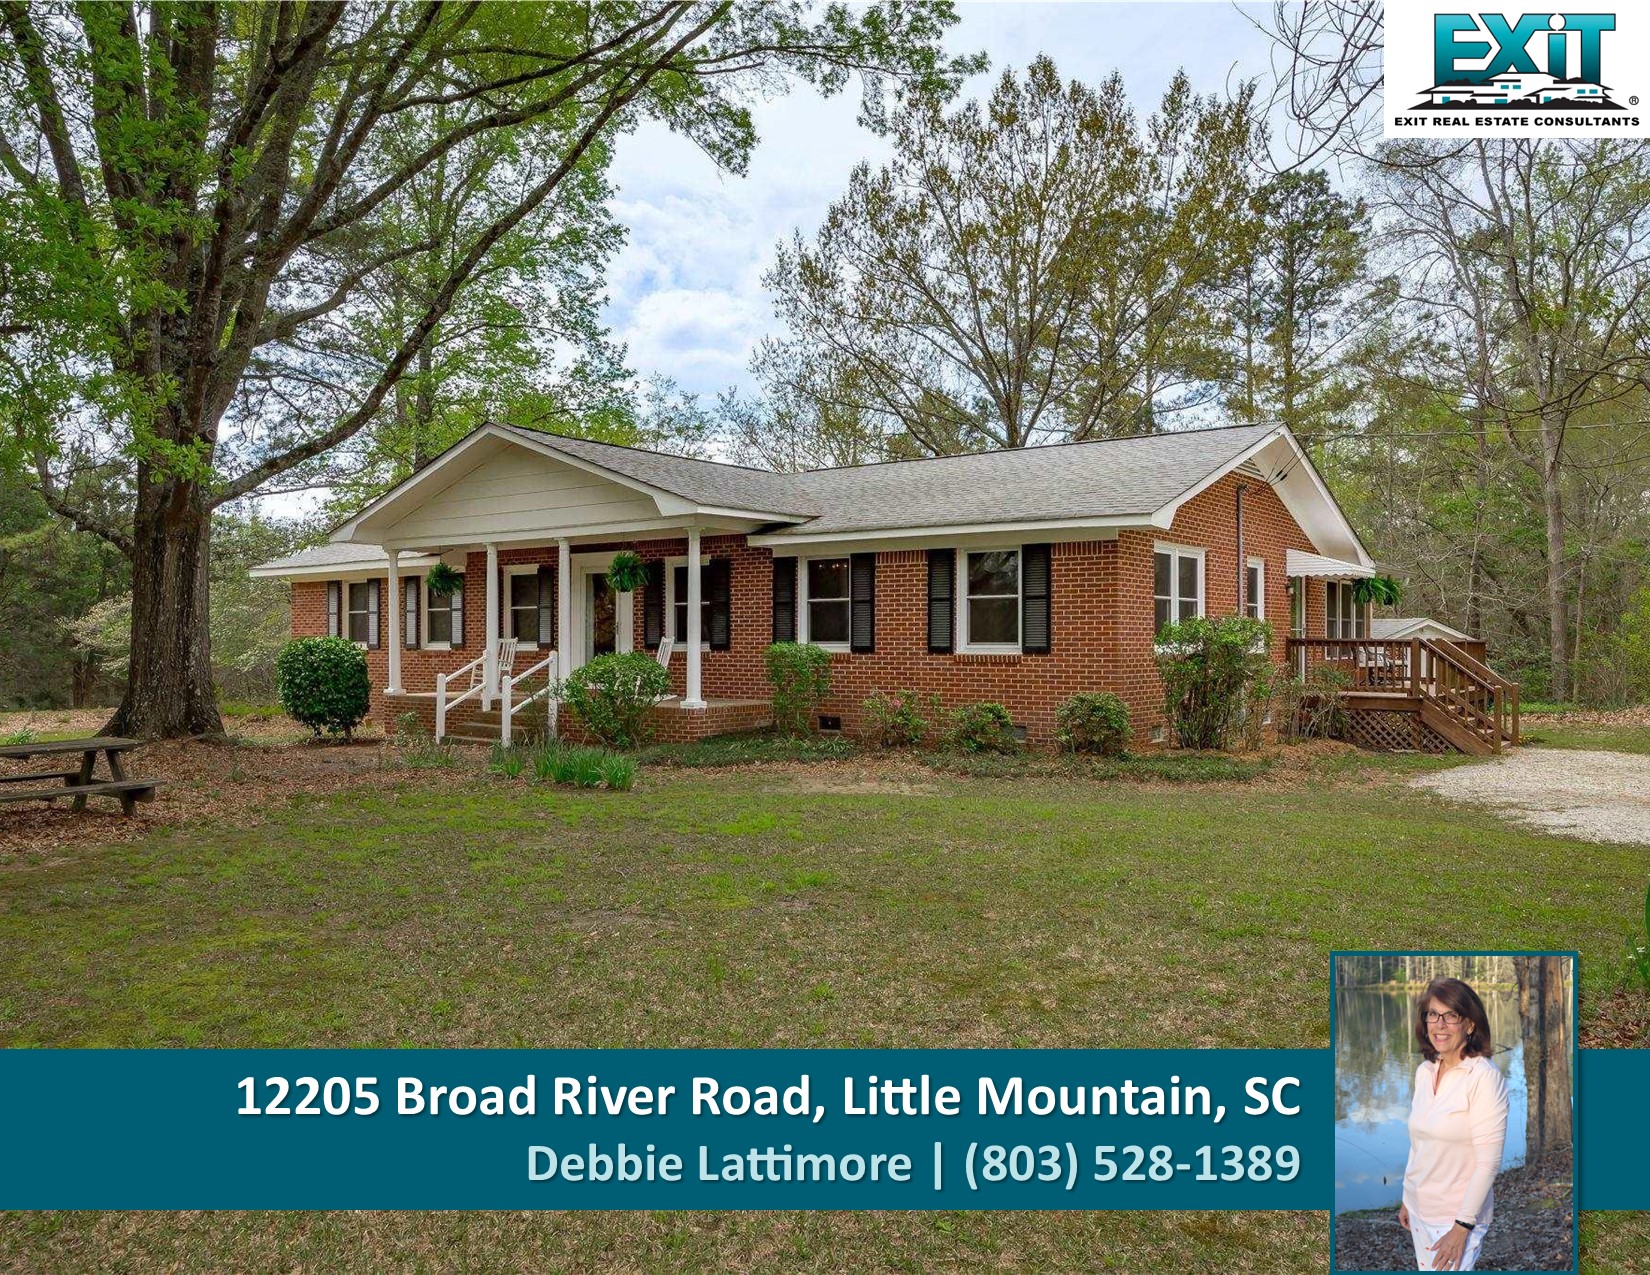 Just listed in Little Mountain